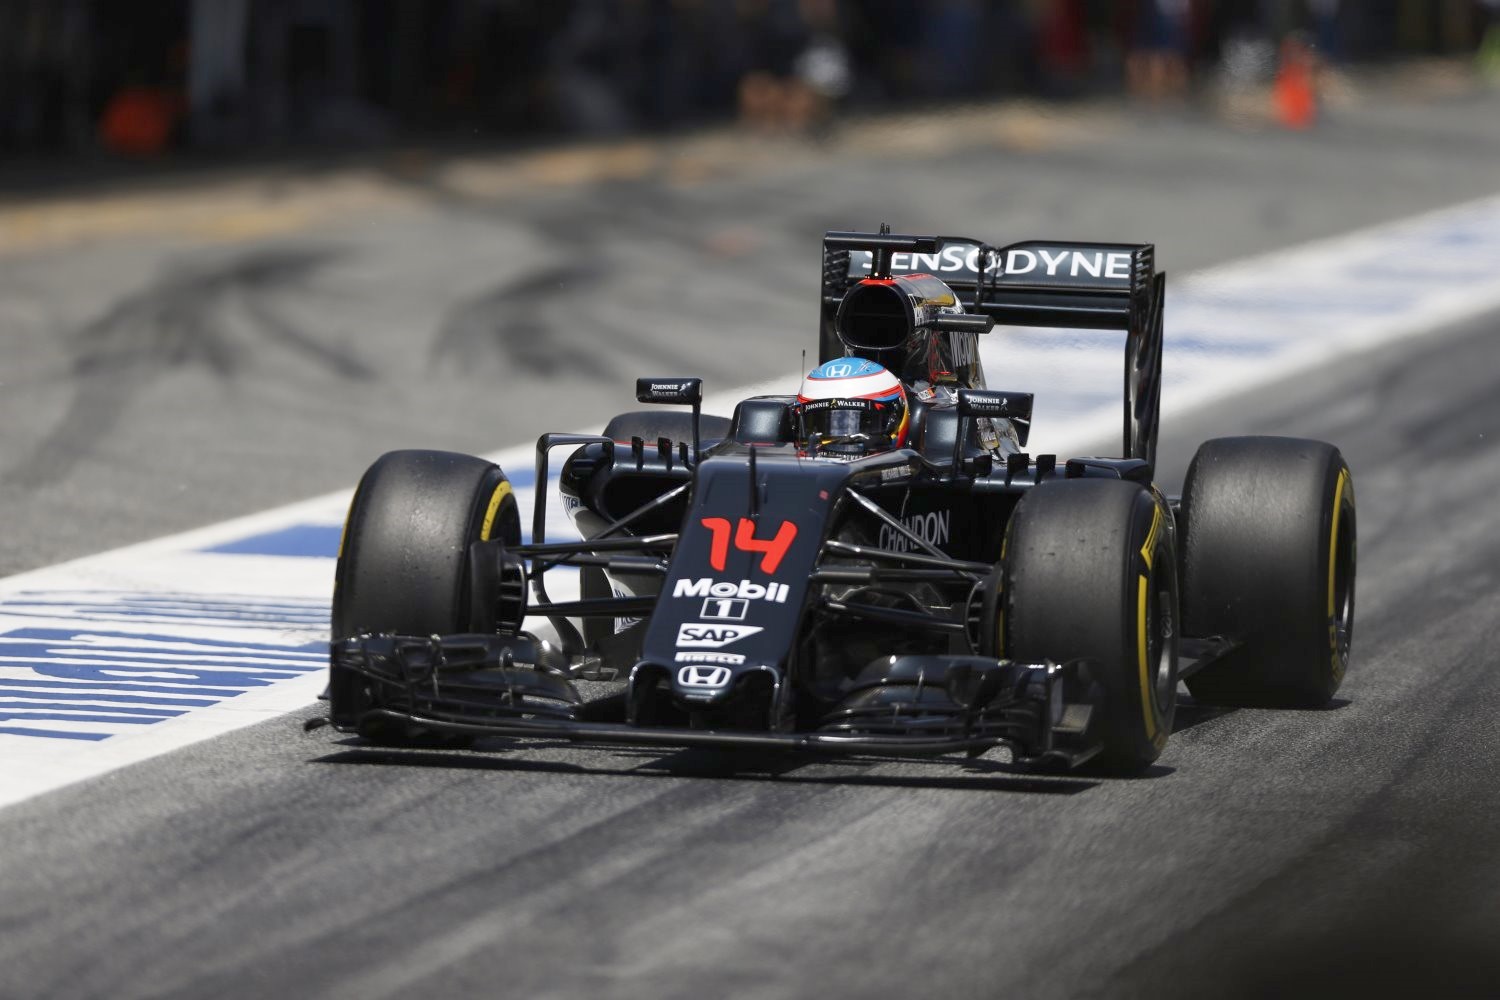 McLaren not keeping pace with its engine?